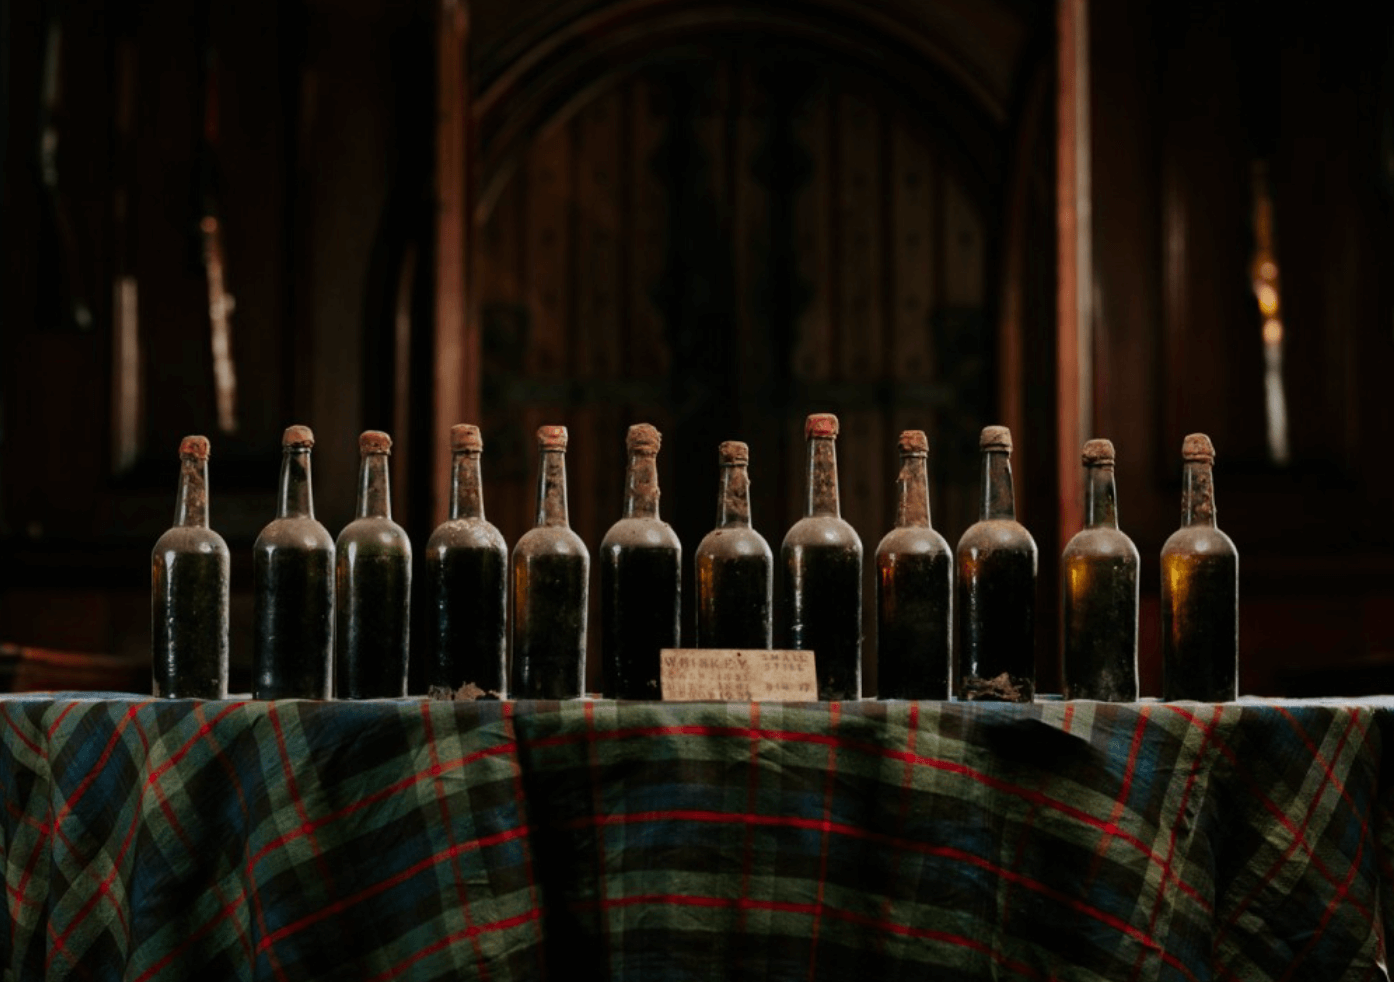 A few bottles of the Blair Castle c.1833 Scotch Whisky found in Blair Castle